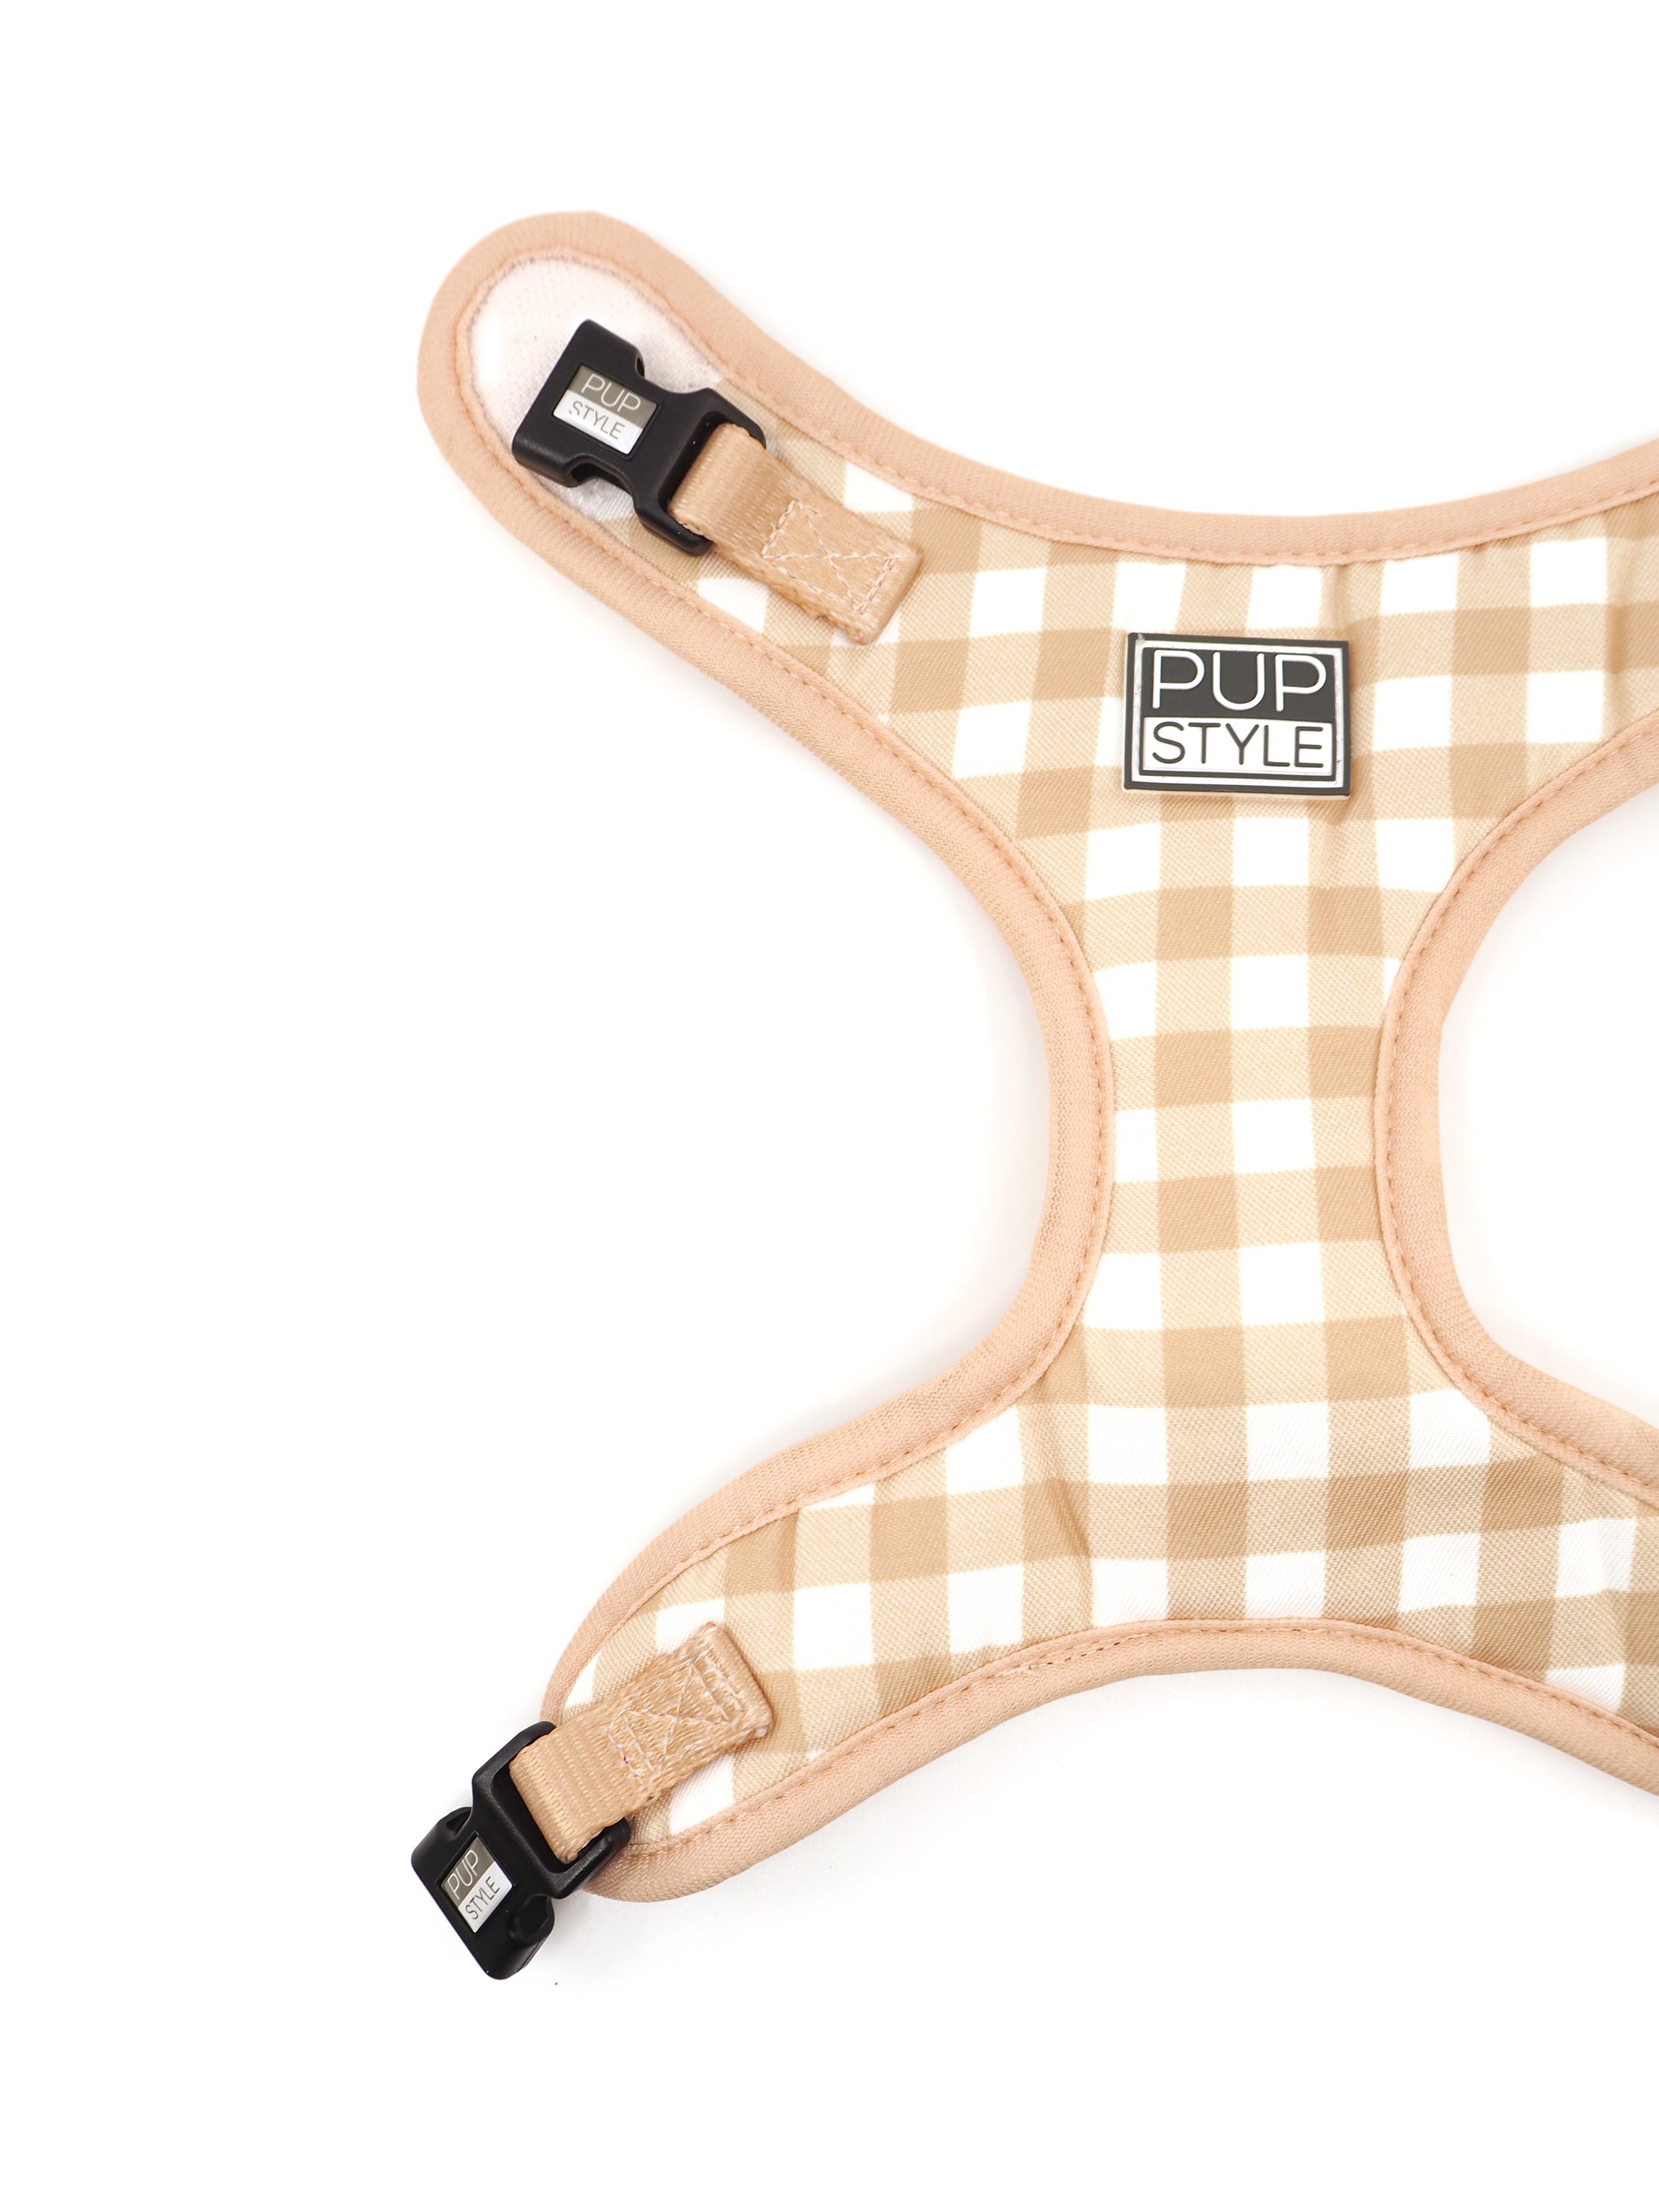 Creme Brulee Step In Harness by Pupstyle StoreHarness